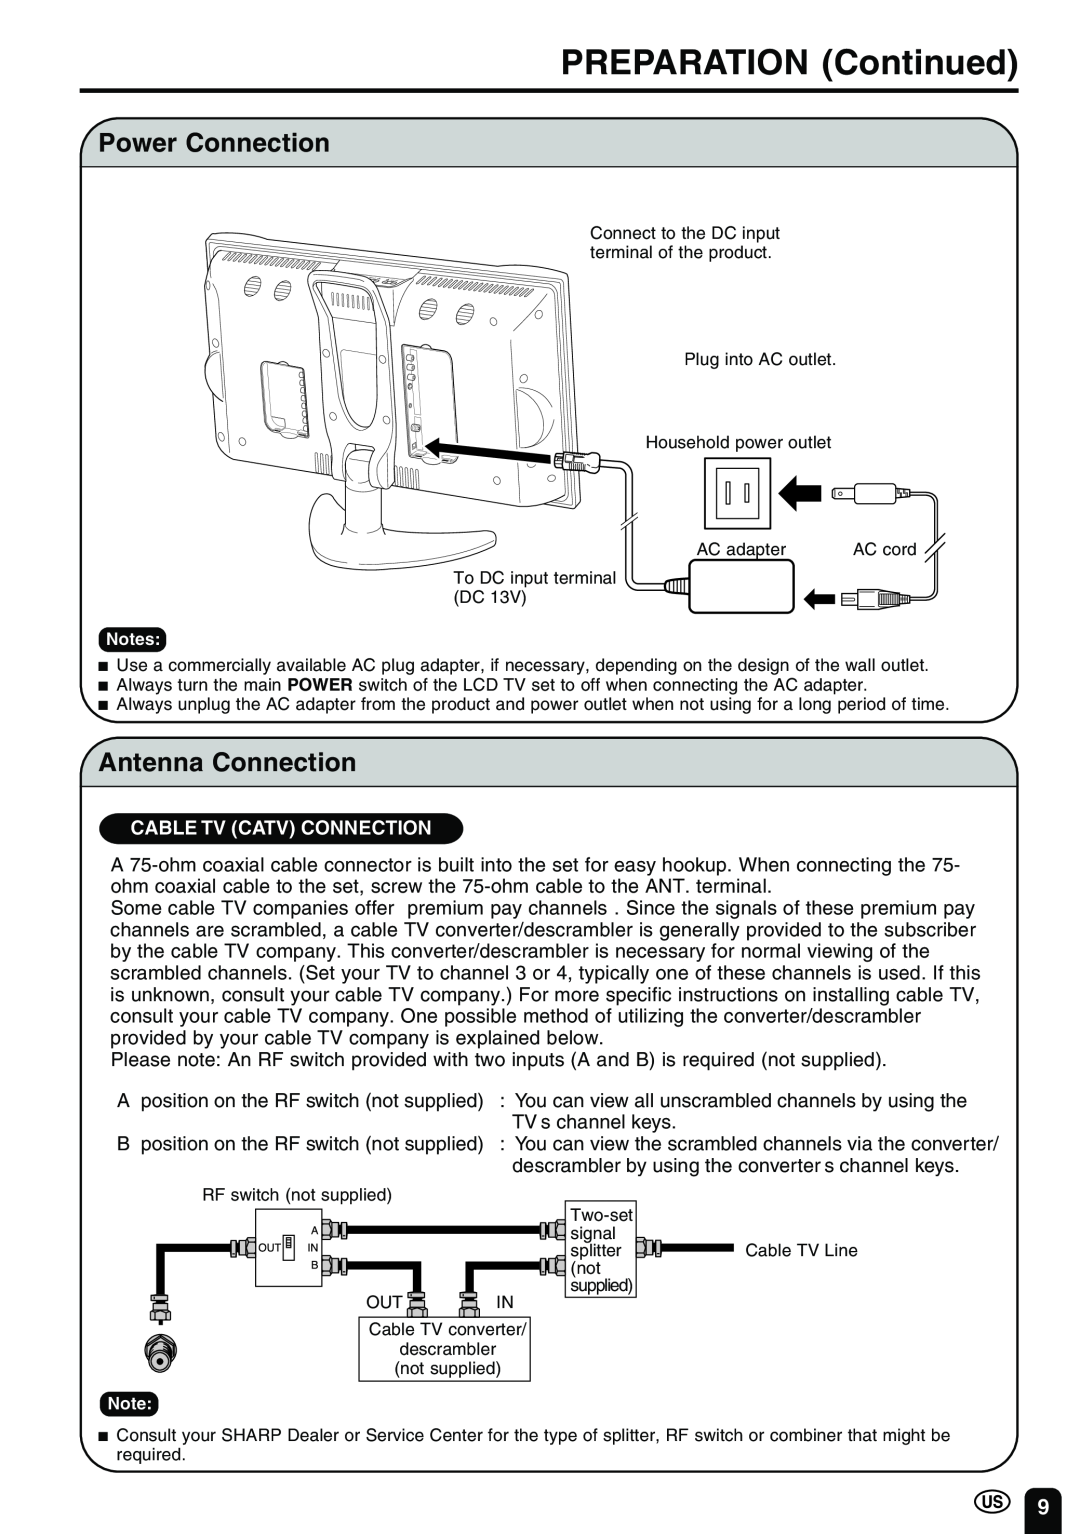 Sharp LC-20B2UA operation manual PREPARATION Continued, Power Connection, Antenna Connection, Cable Tv Catv Connection 